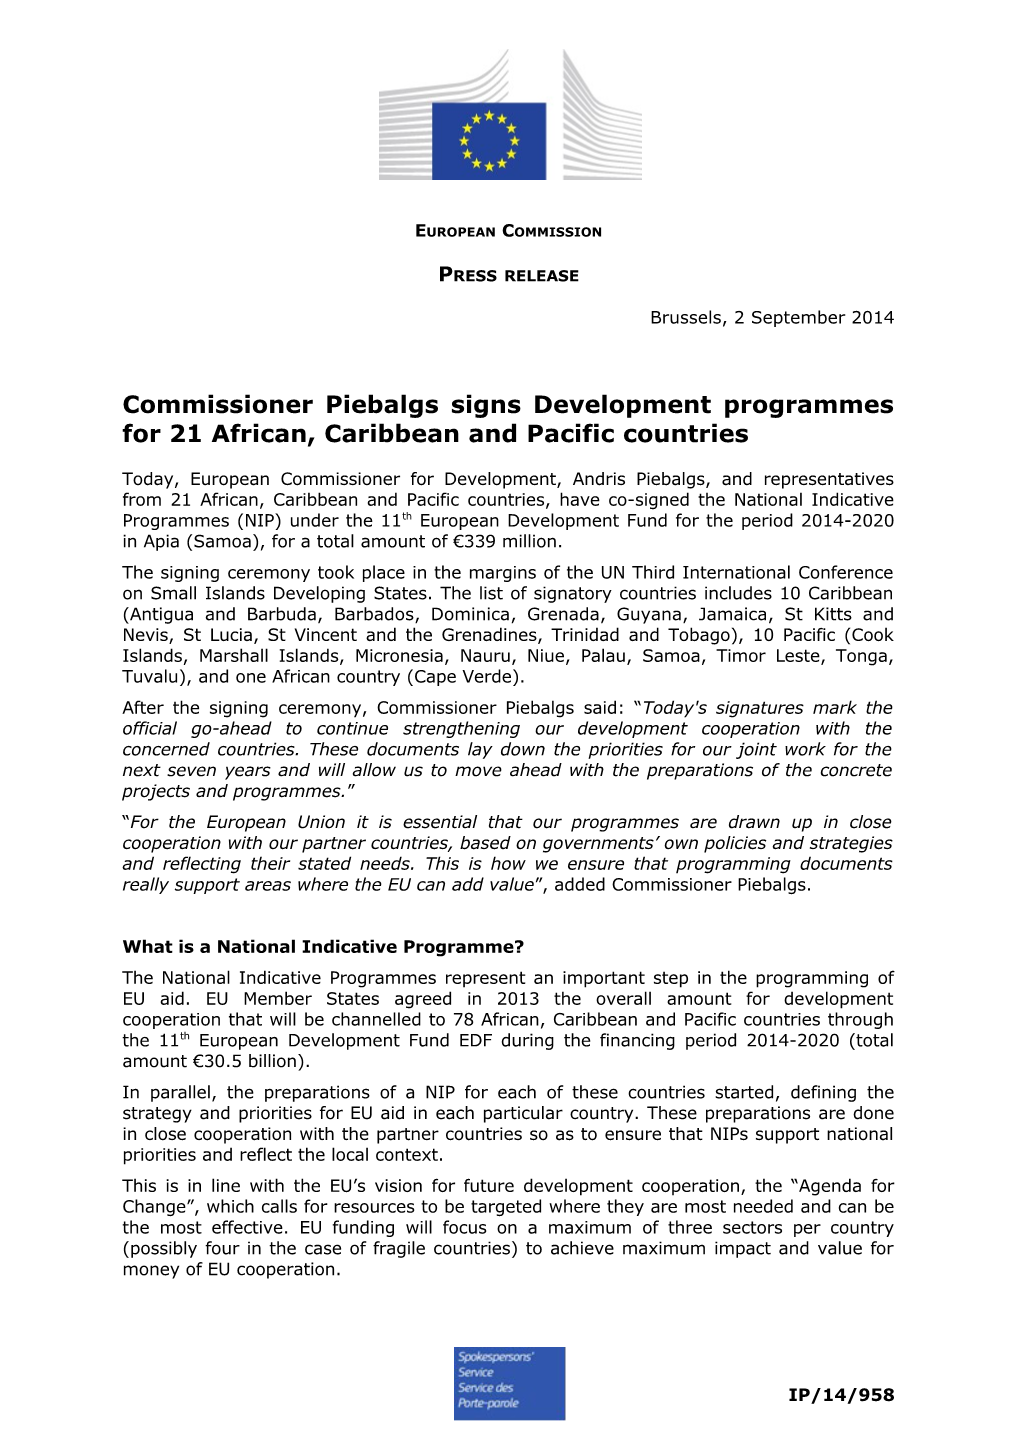 Commissioner Piebalgs Signs Development Programmes for 21 African, Caribbean and Pacific